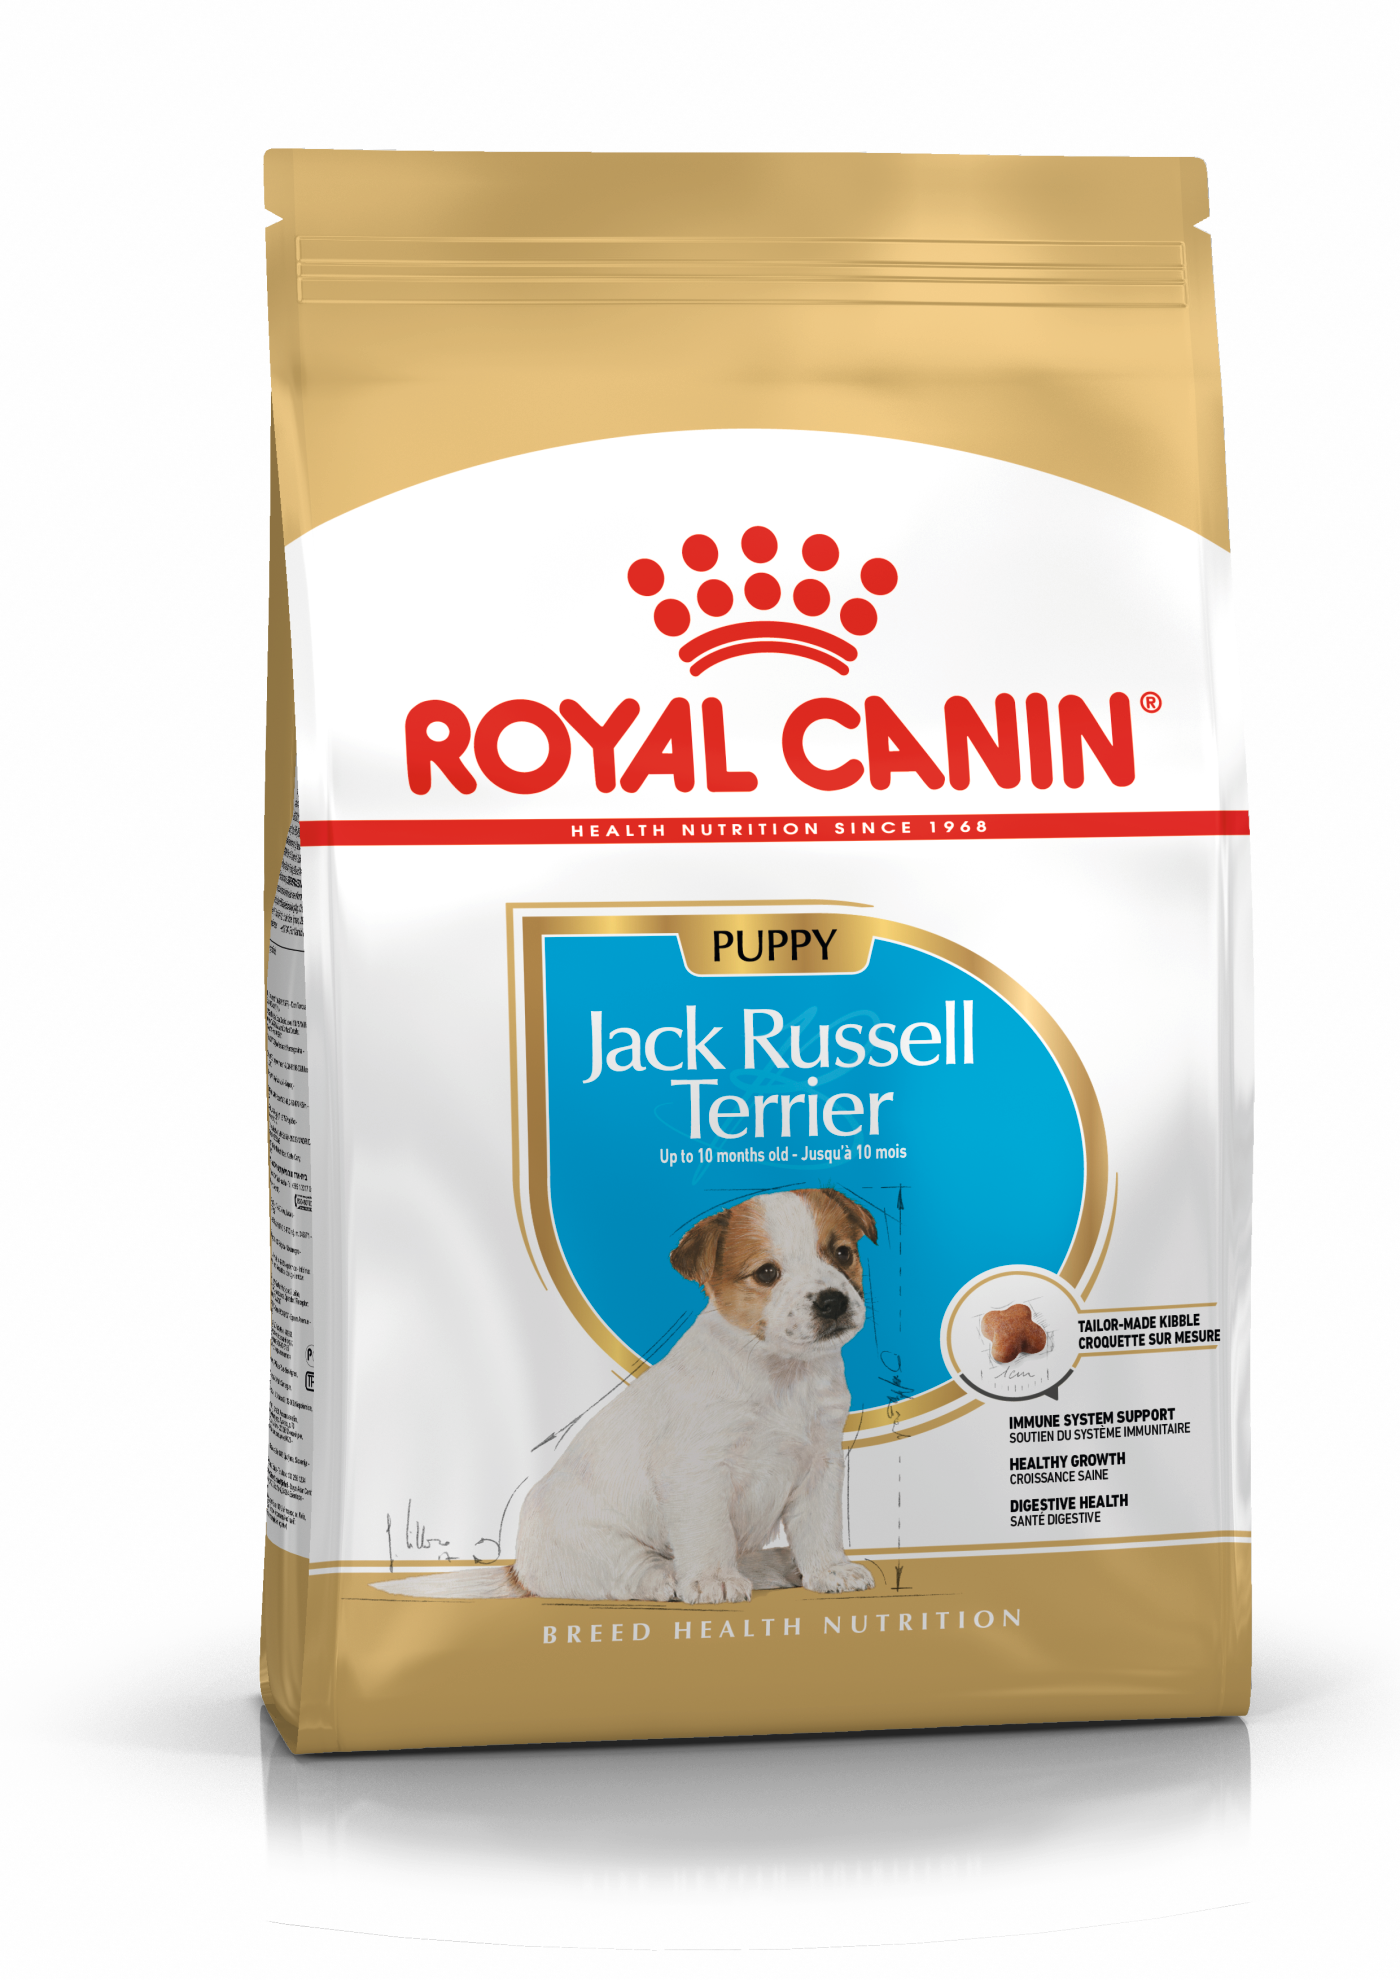 Image of Jack Russel puppy product